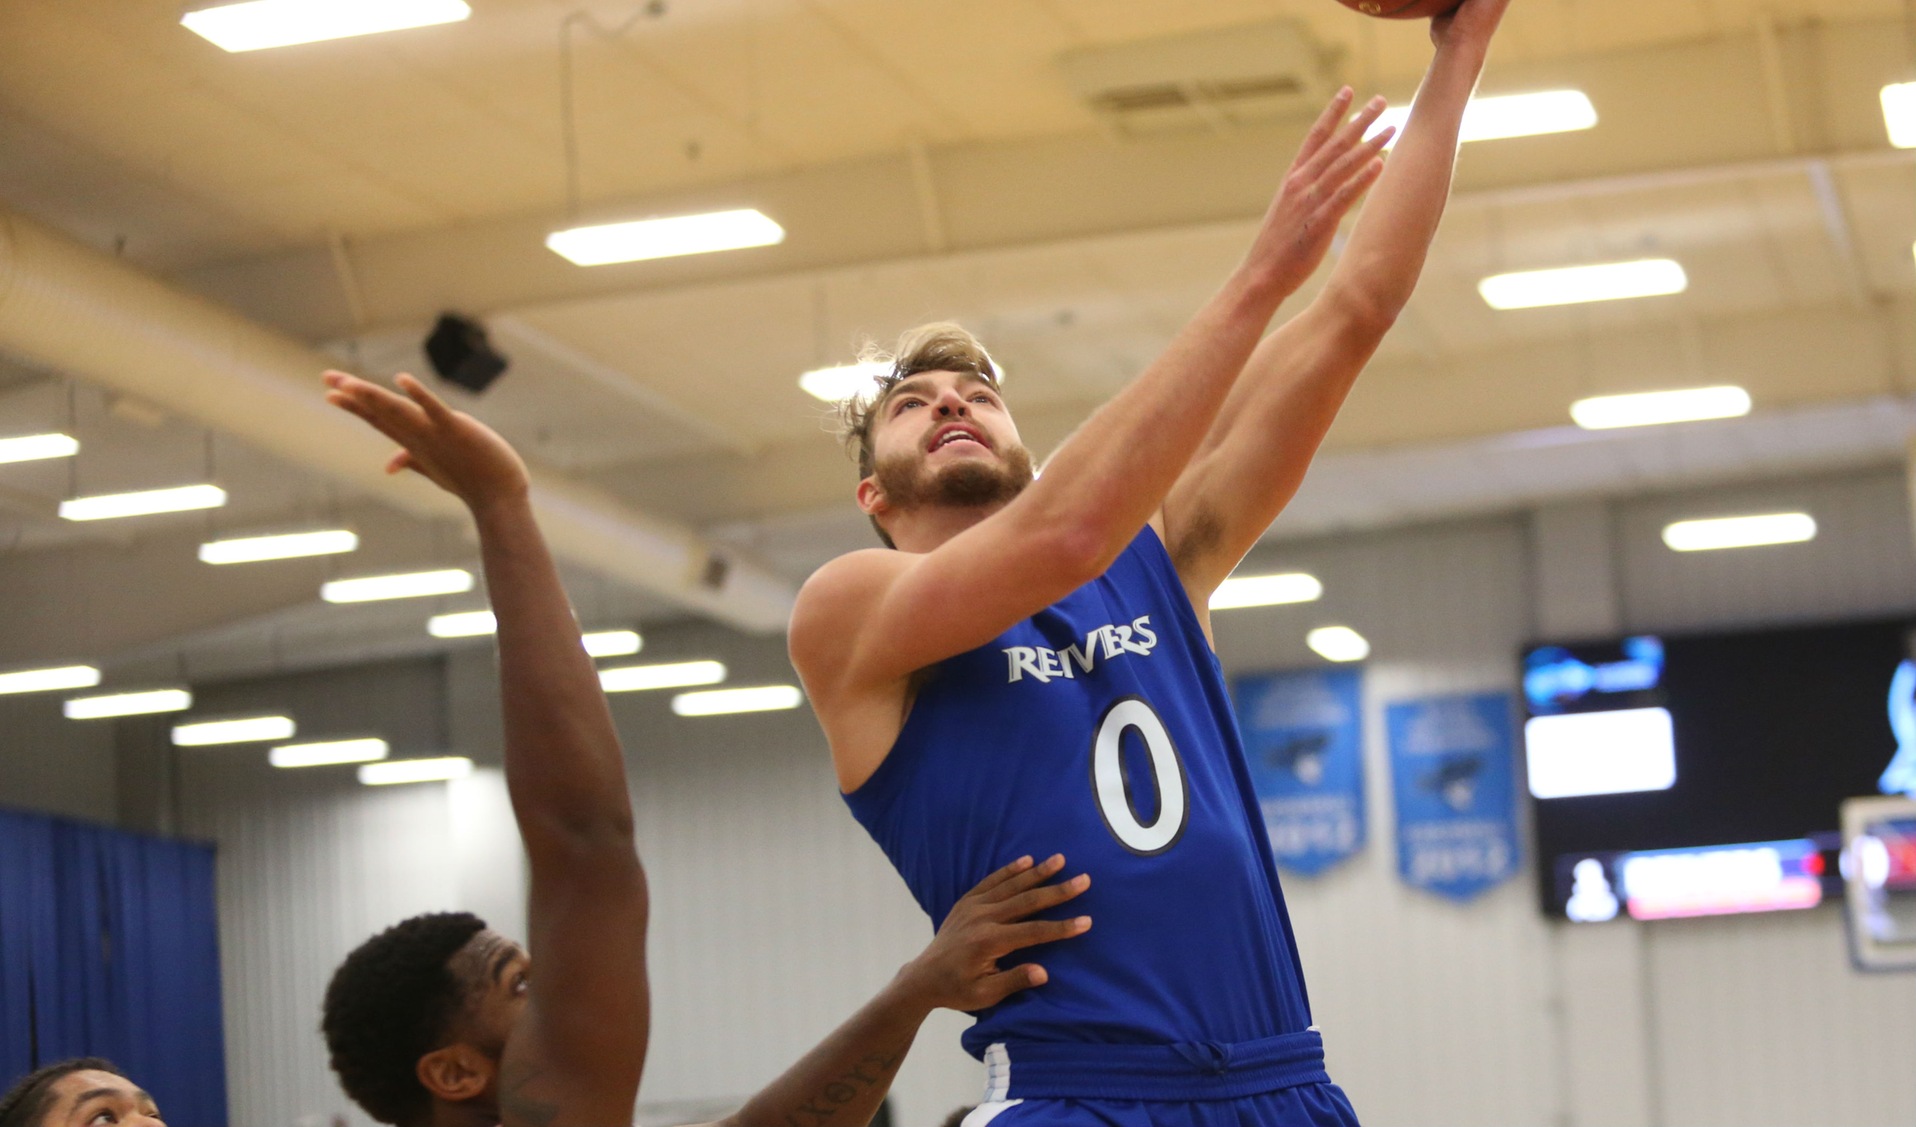 Parker Hazen's 17 point - 8 rebound effort was not enough as Iowa Western fell at Southeastern in the ICCAC Region XI Semi-Finals Wednesday evening (2/27/19).